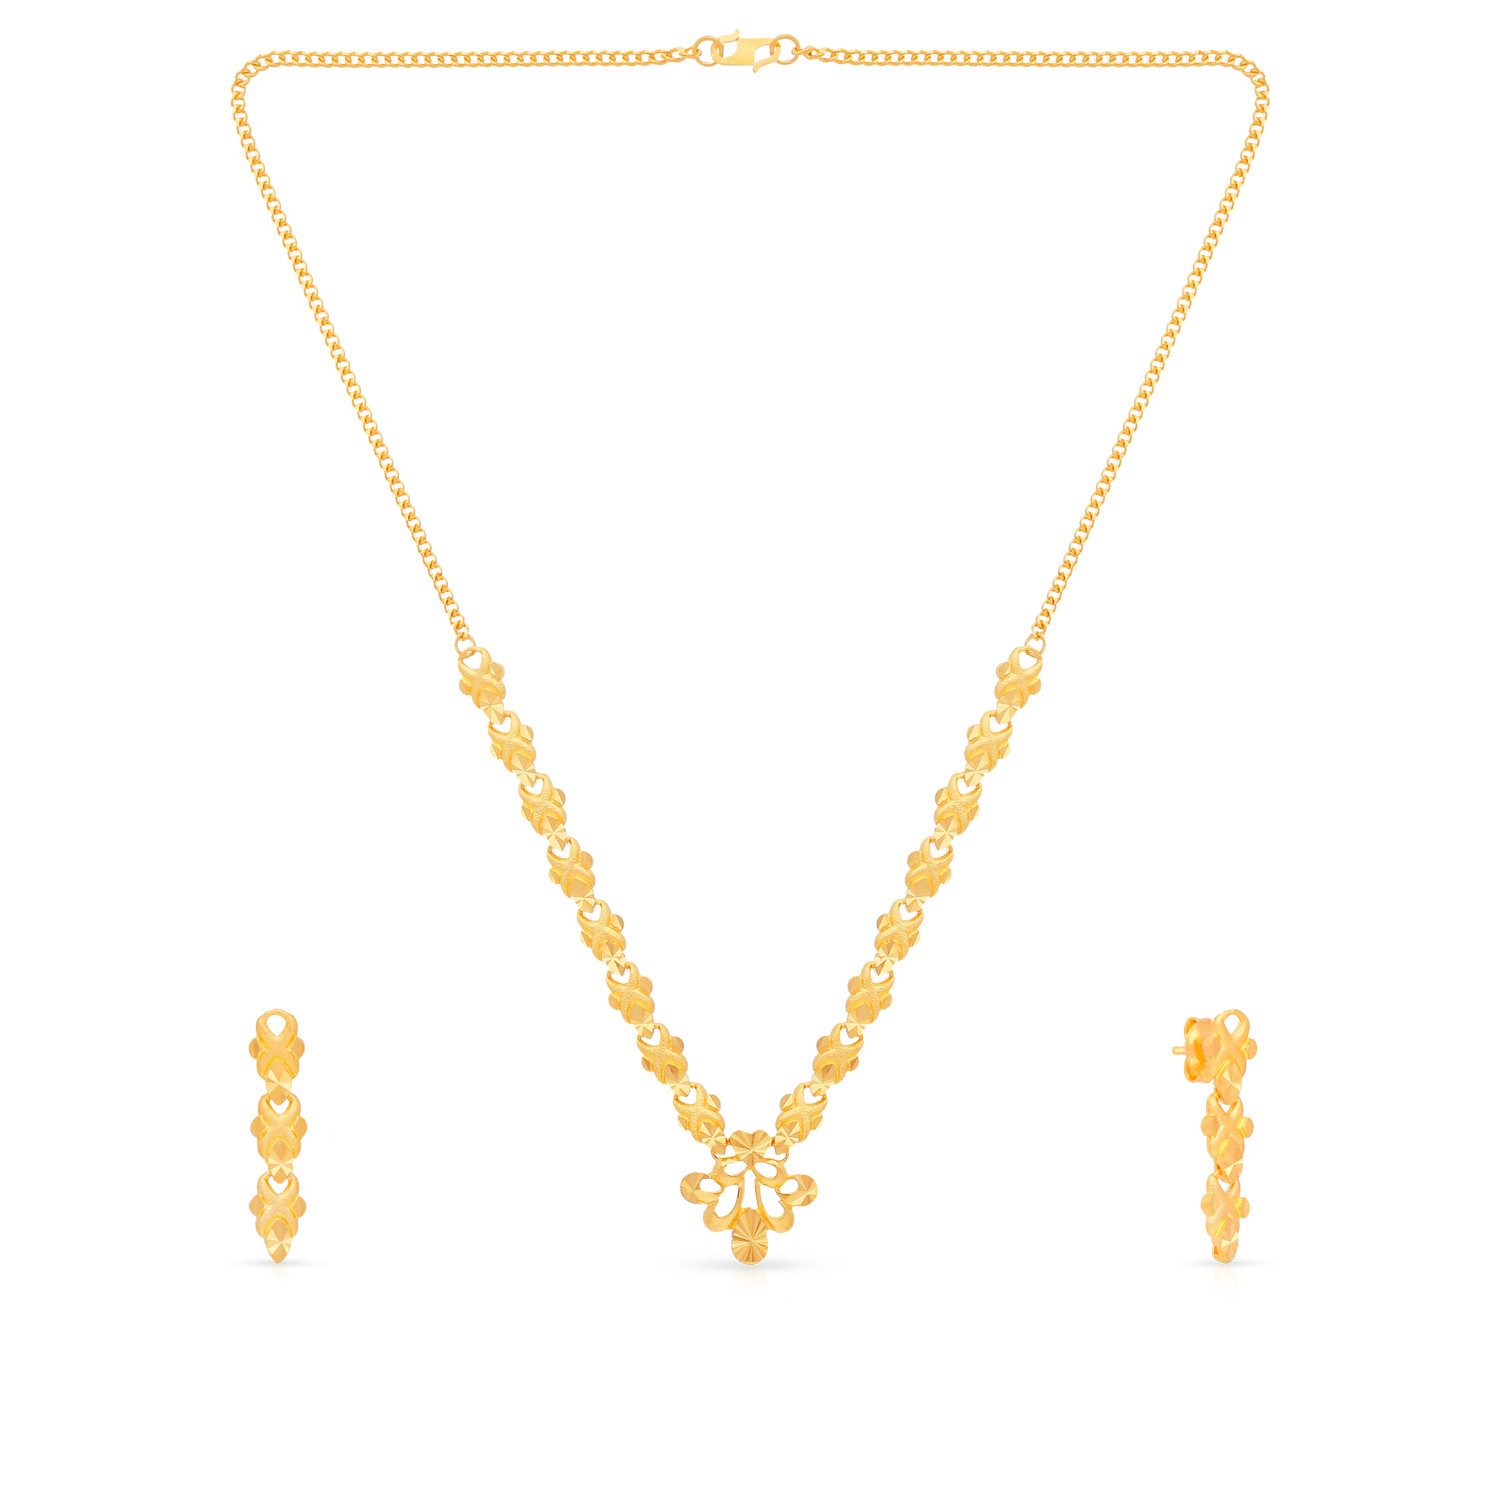 Buy MALABAR GOLD AND DIAMONDS Mens 22 KT Gold Chain | Shoppers Stop